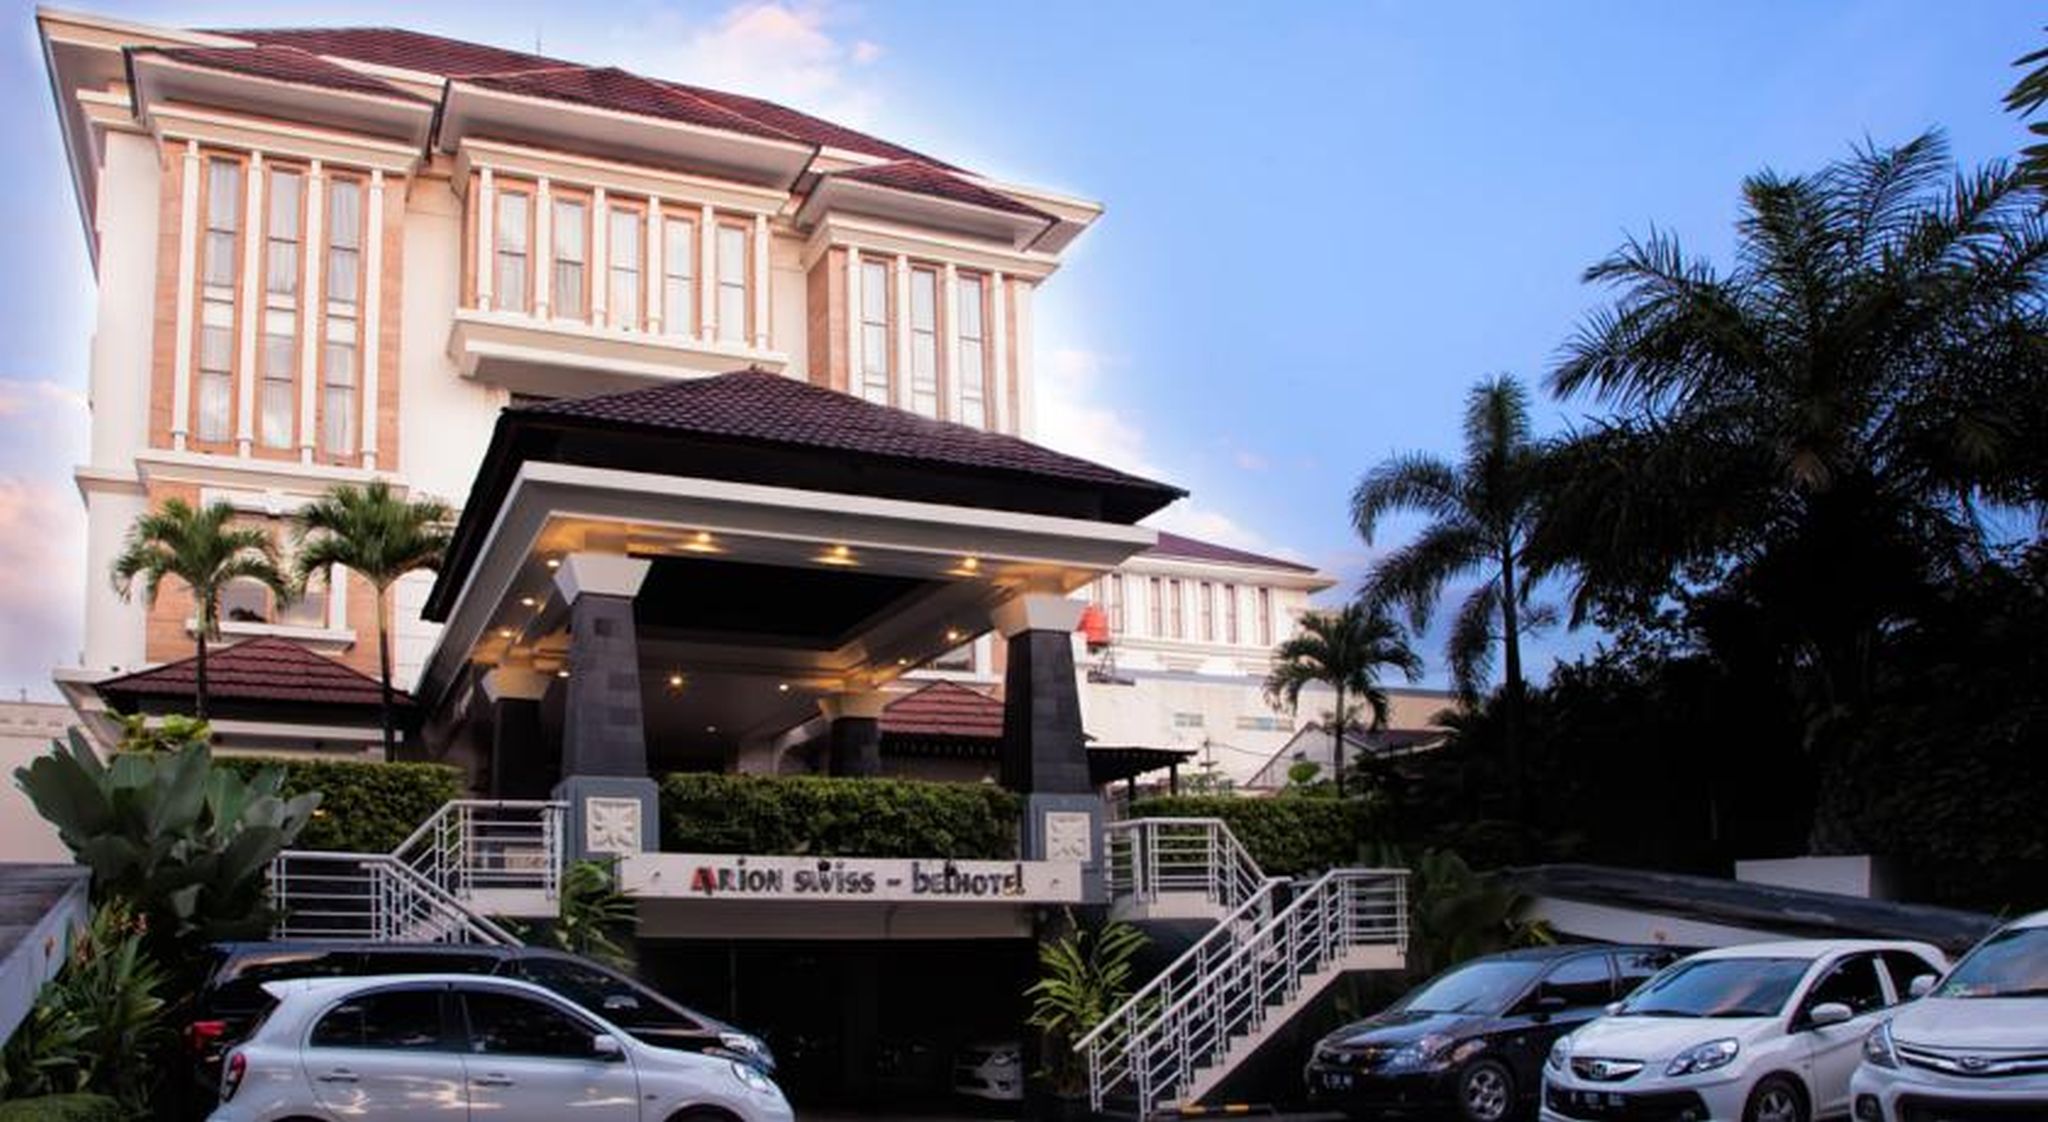 Arion Suites Hotel Bandung image